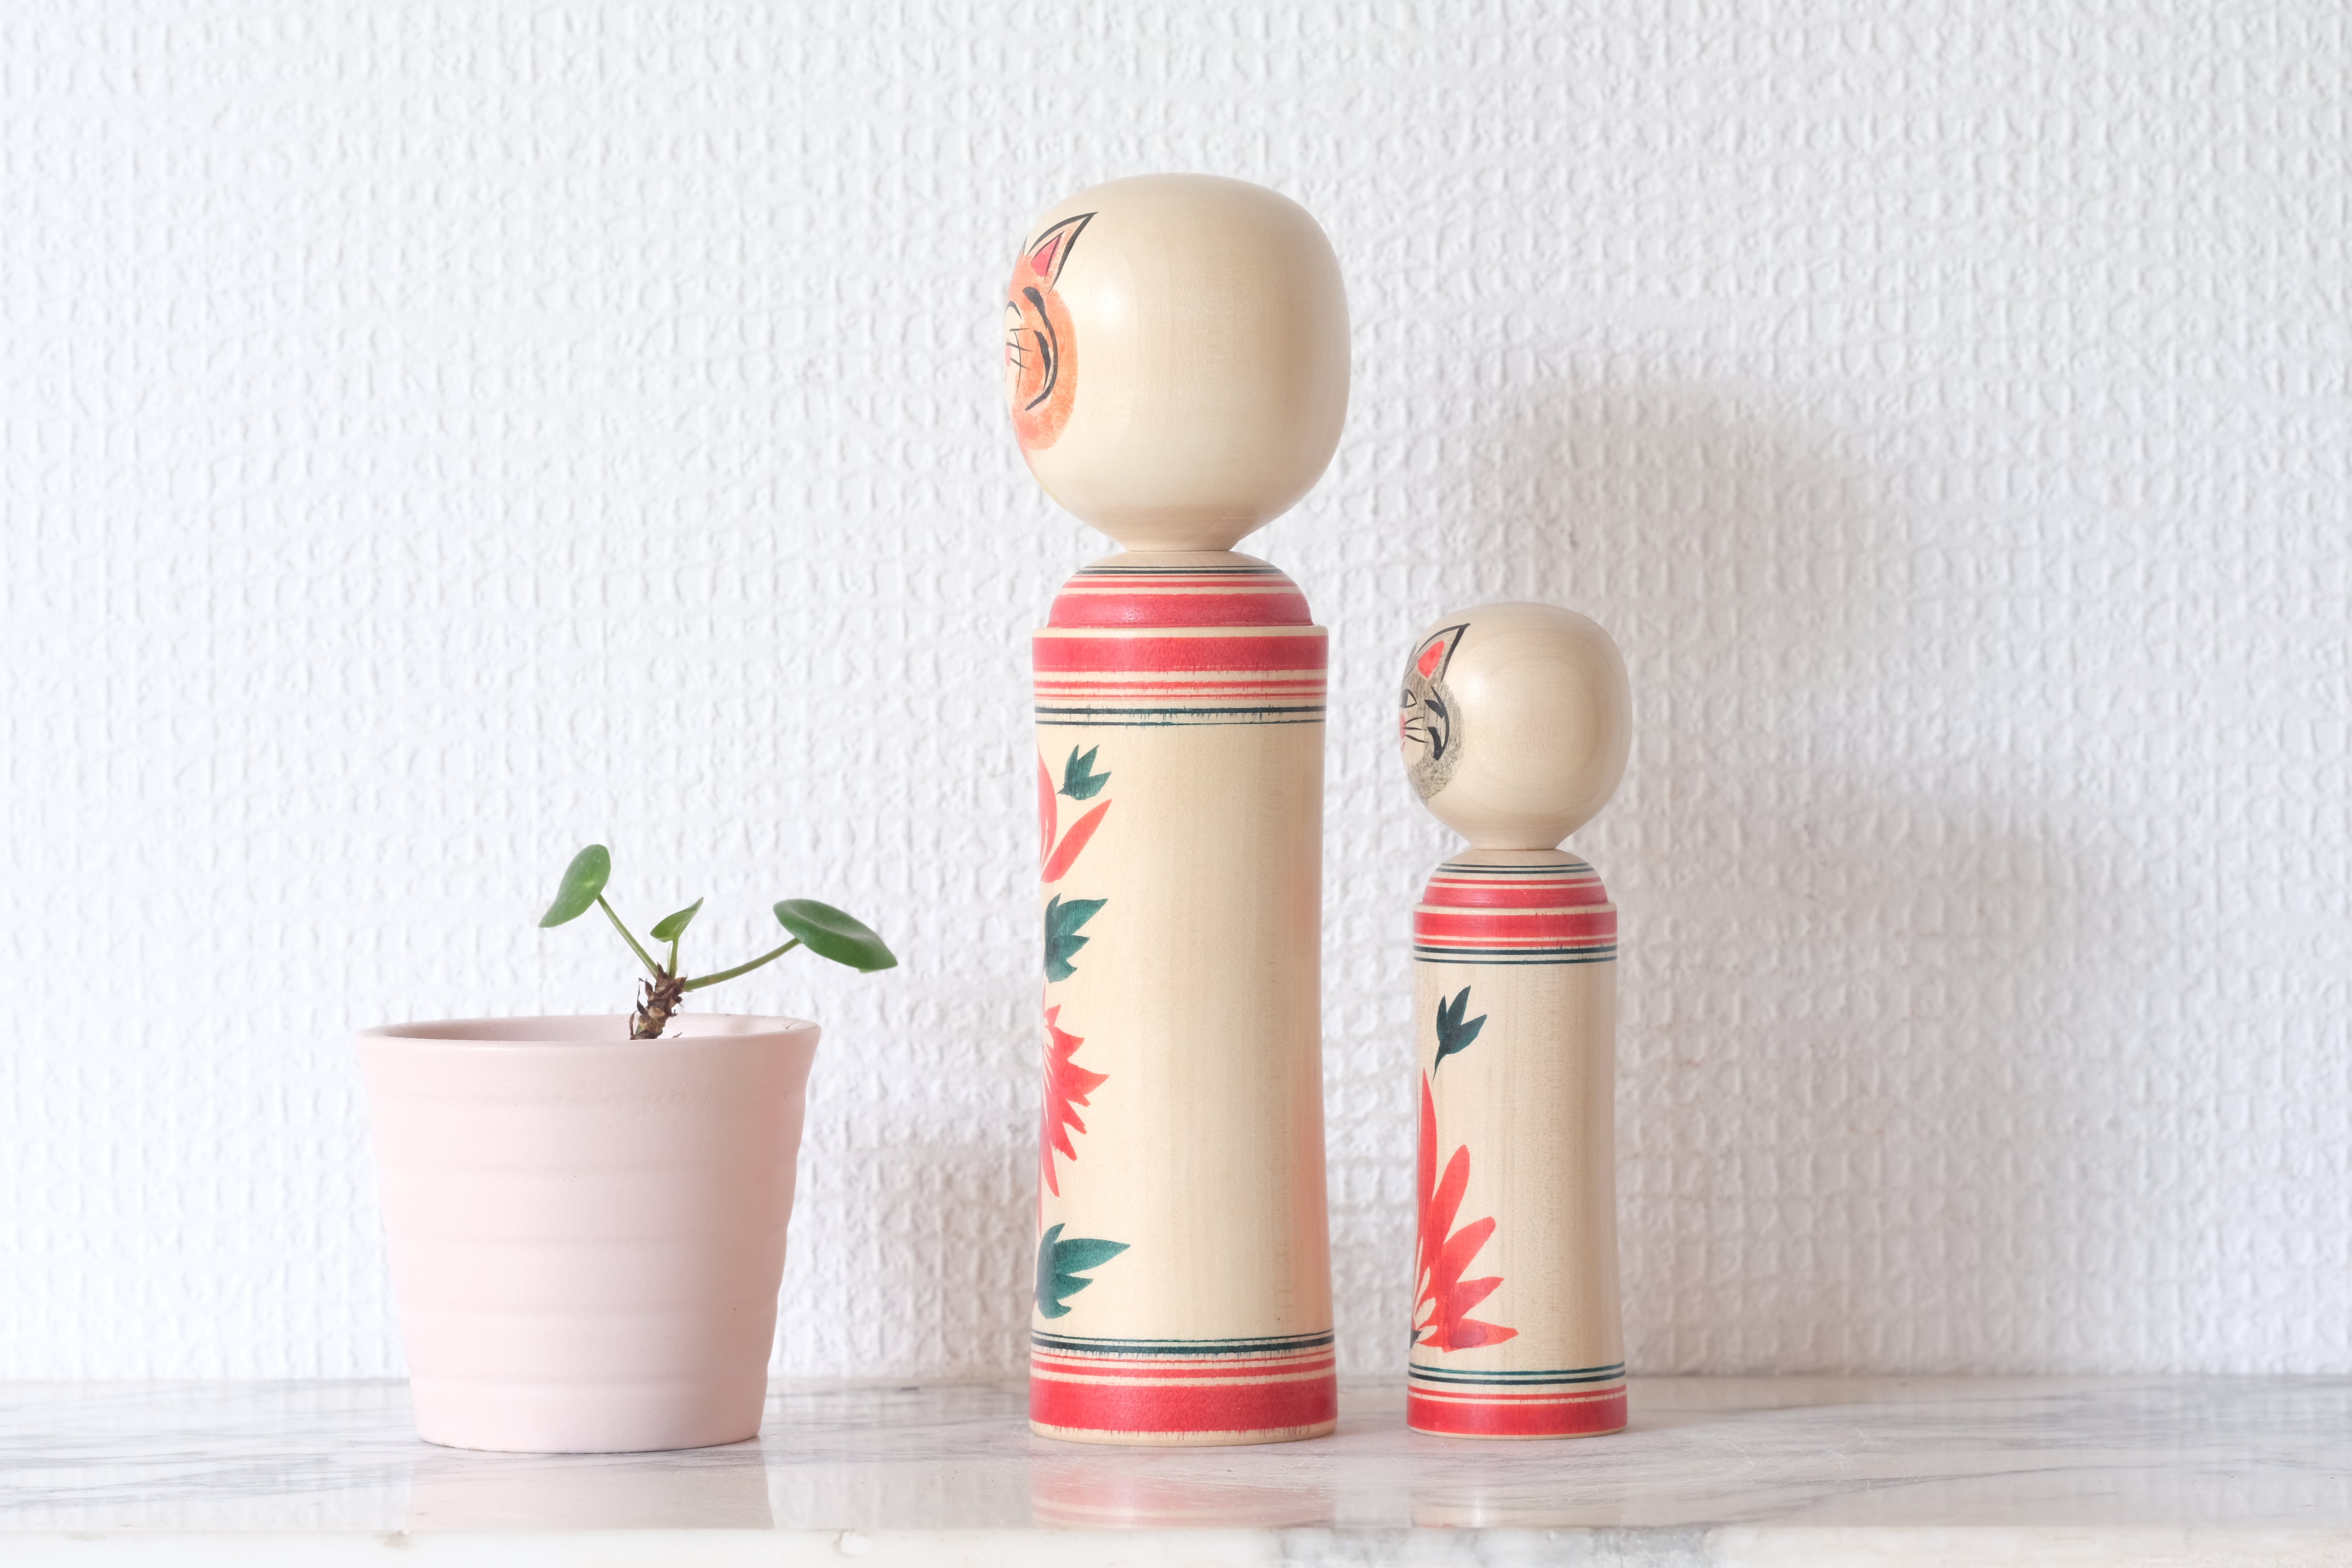 A Rare Pair of Traditional Narugo Kokeshi with Cat Faces | 12 cm and 18 cm